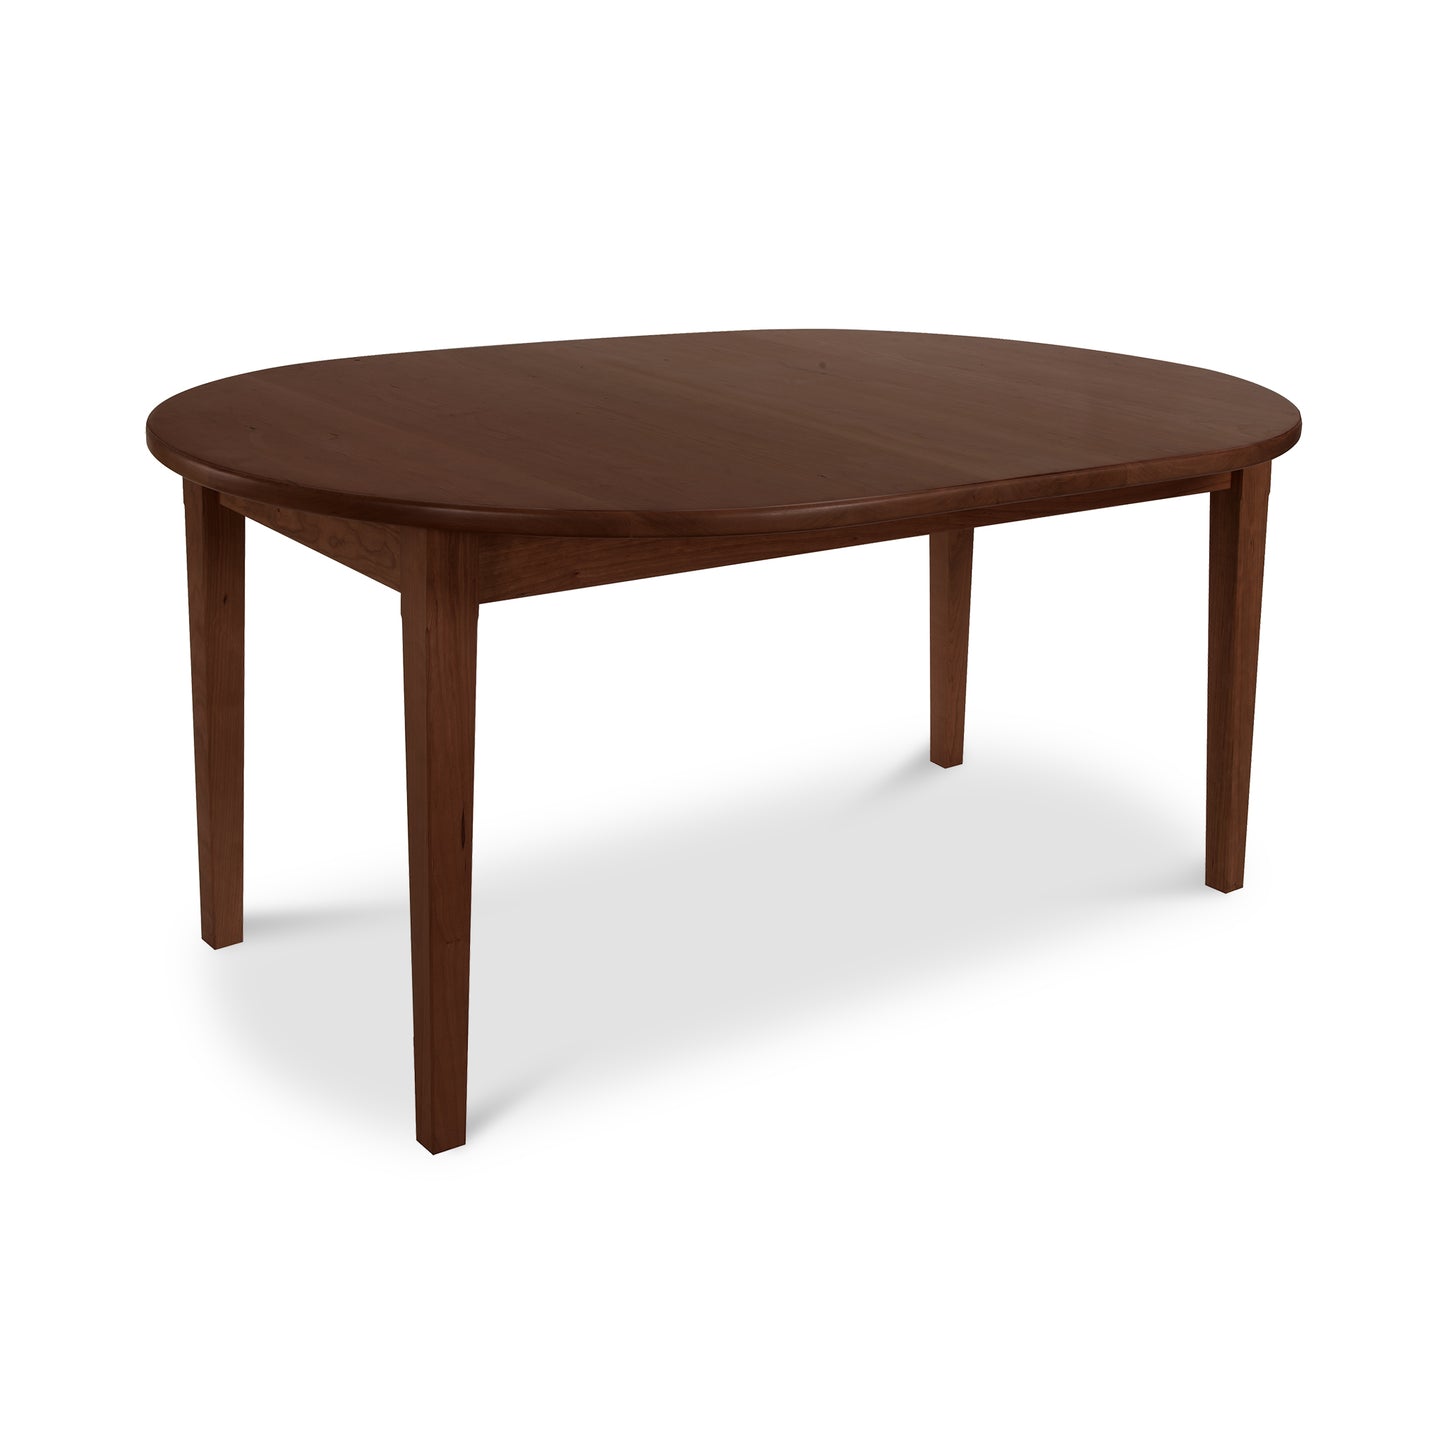 A Vermont Shaker Oval Solid Top Dining Table from Maple Corner Woodworks, with a smooth top and four legs, isolated on a white background.